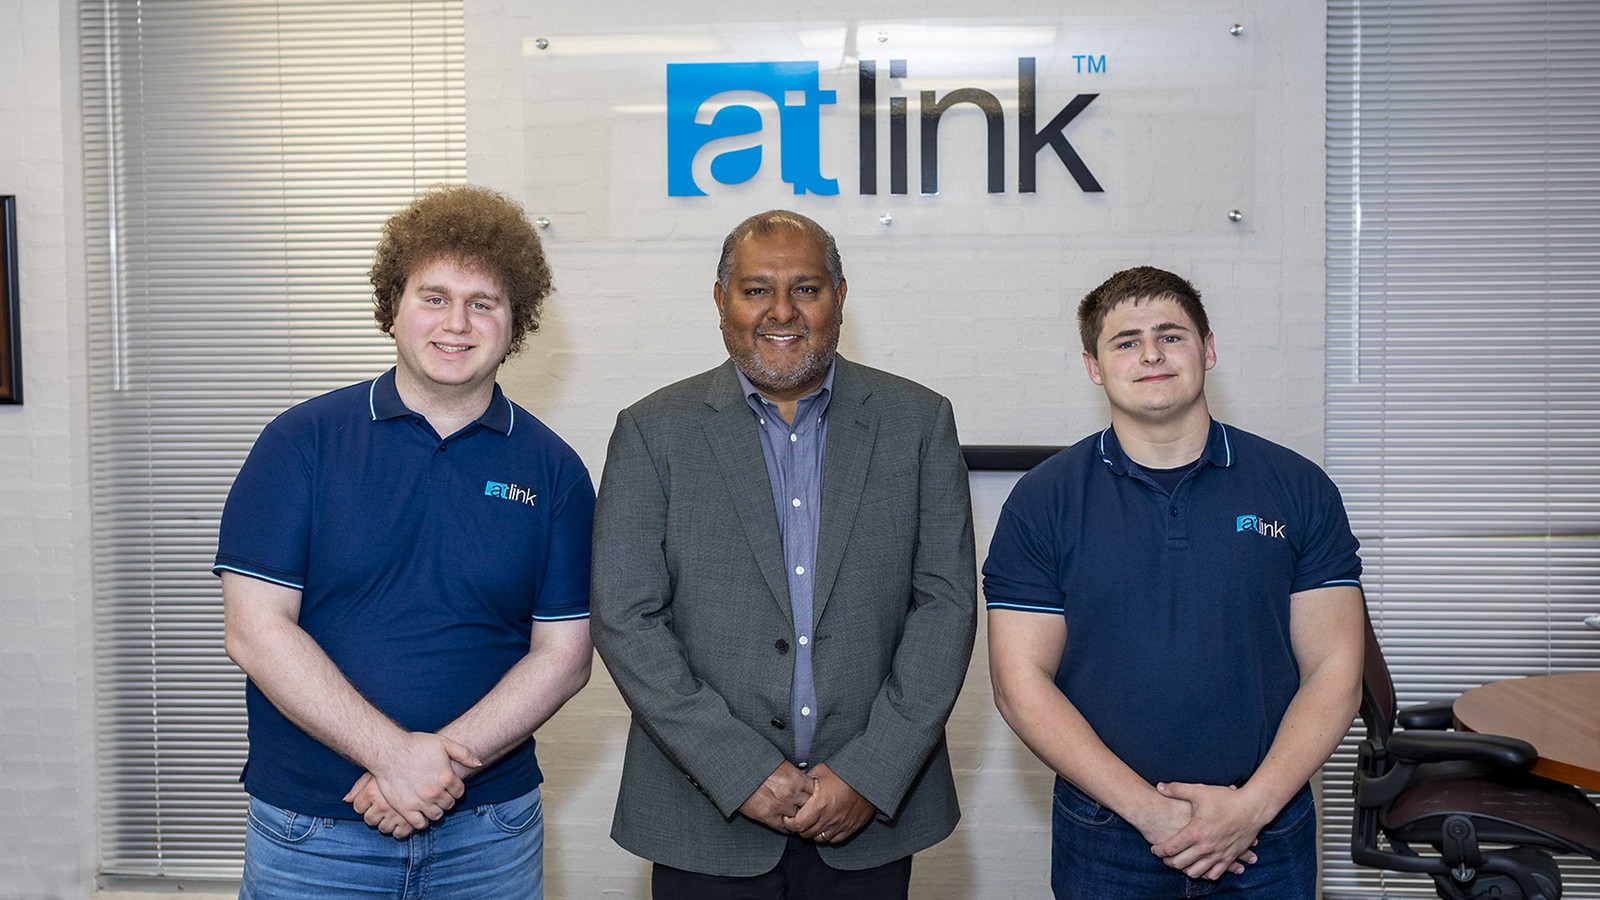 UHCL alumnus Dilhar De Silva, pictured with IT specialists like Ryan Brooker and Joseph Bittinger